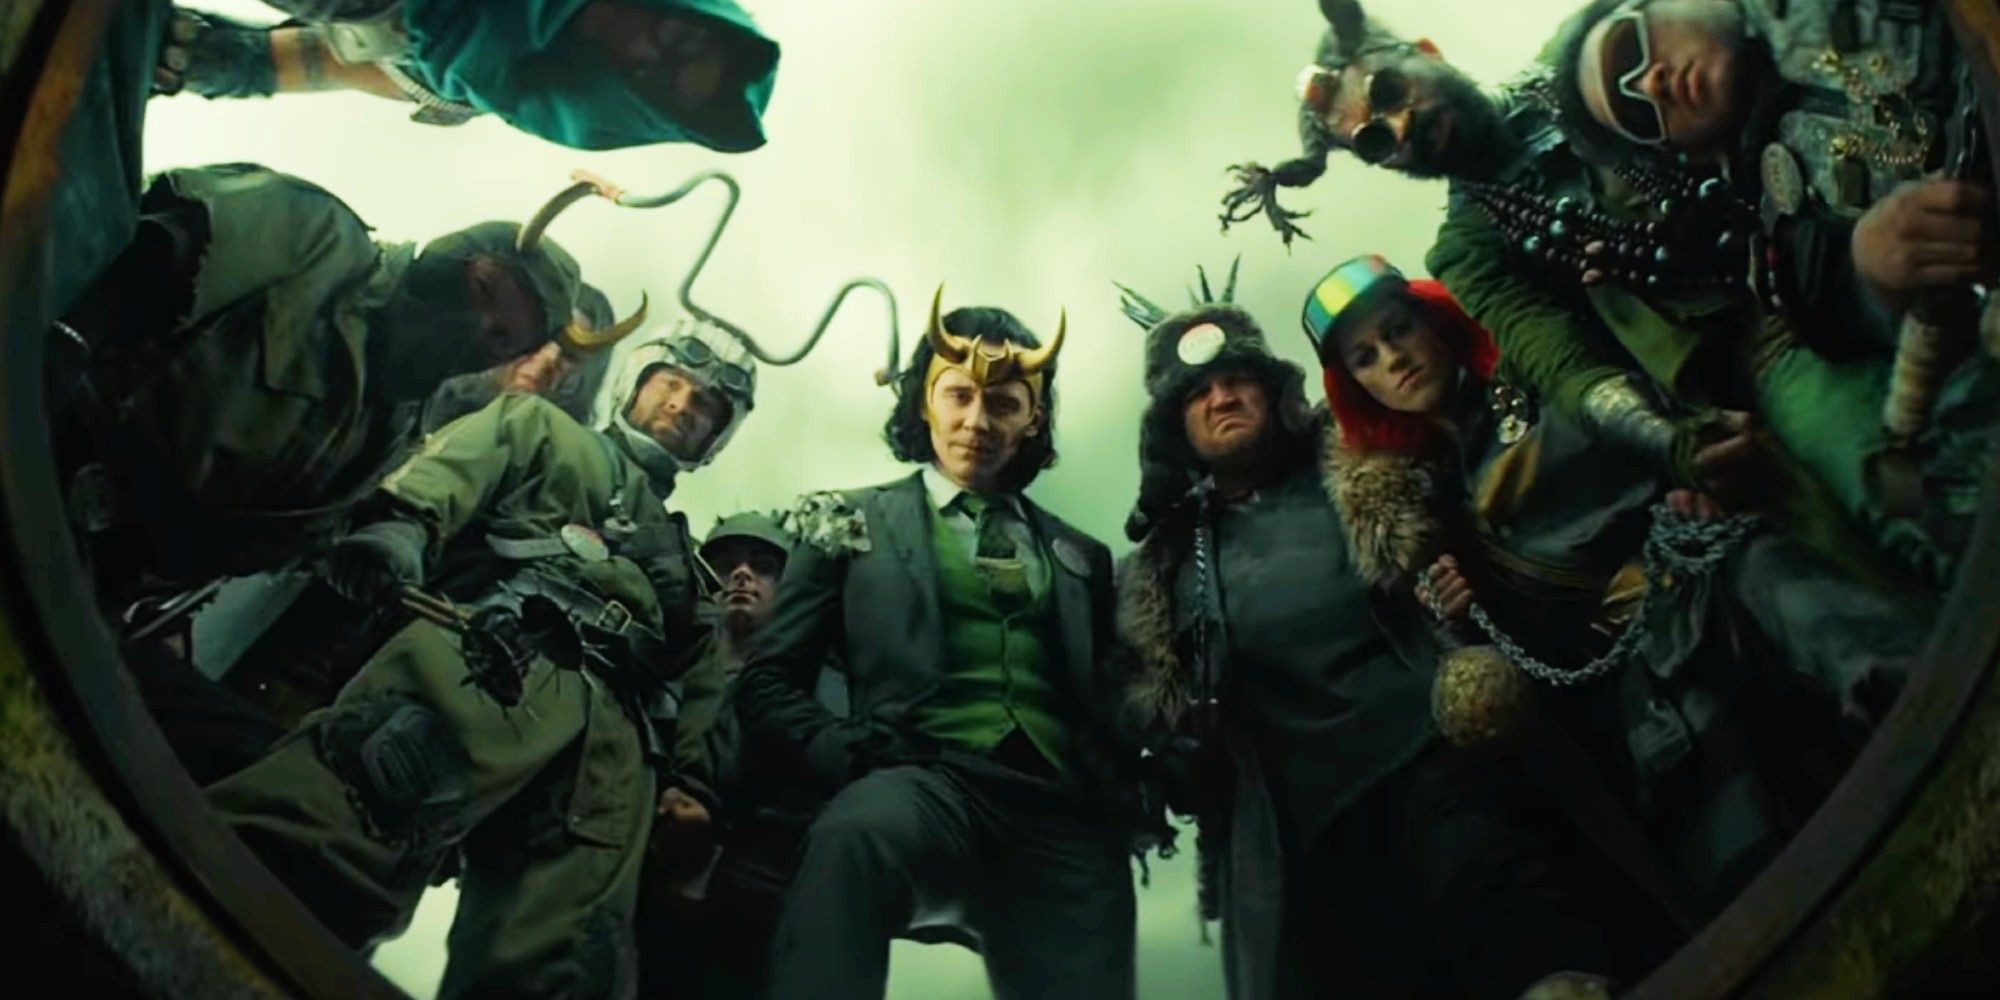 An image of all the Loki Variants looking down a hole with President Loki